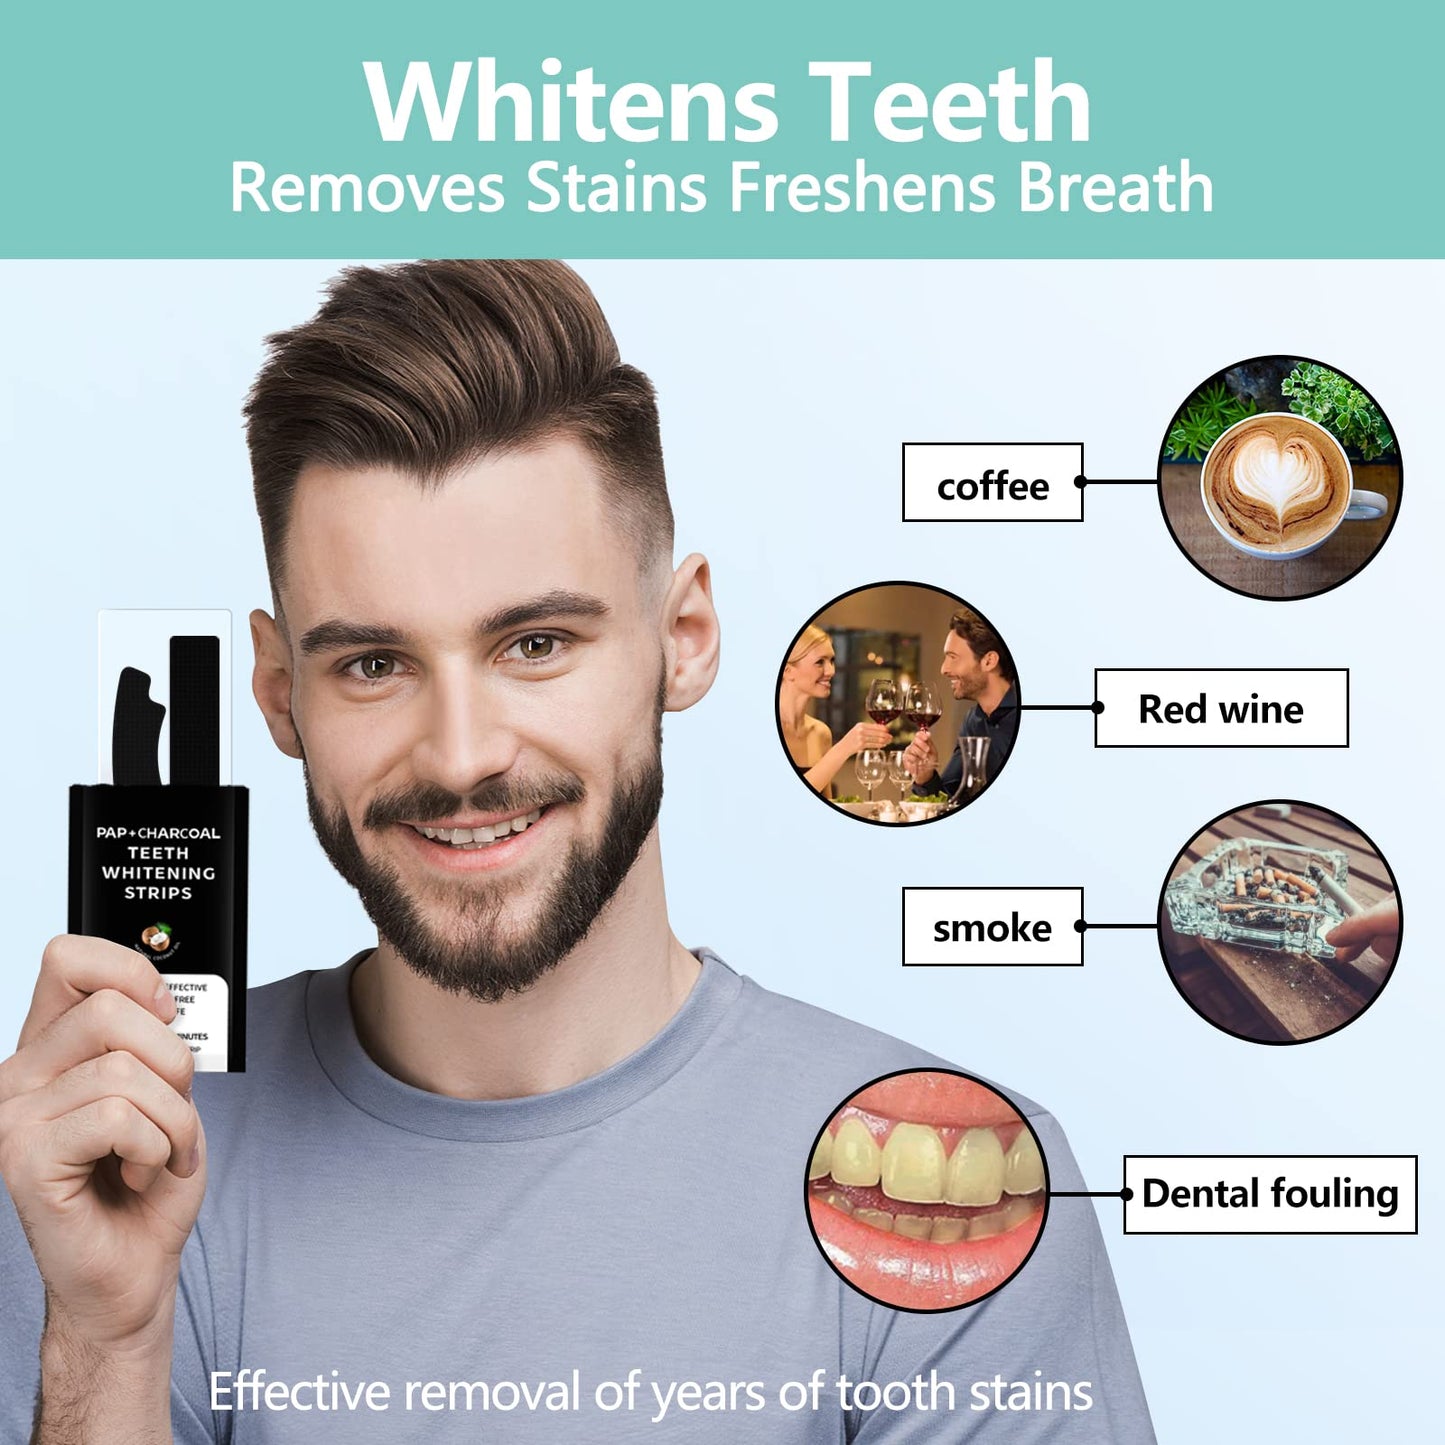 Pap+ Charcoal Teeth Whitening Strips Professional Teeth Whitening Kit for Teeth Sensitive or Coffee Drinker, 28 Tooth Whitener Strips Easy to Use 14 Treatments by ECTEST